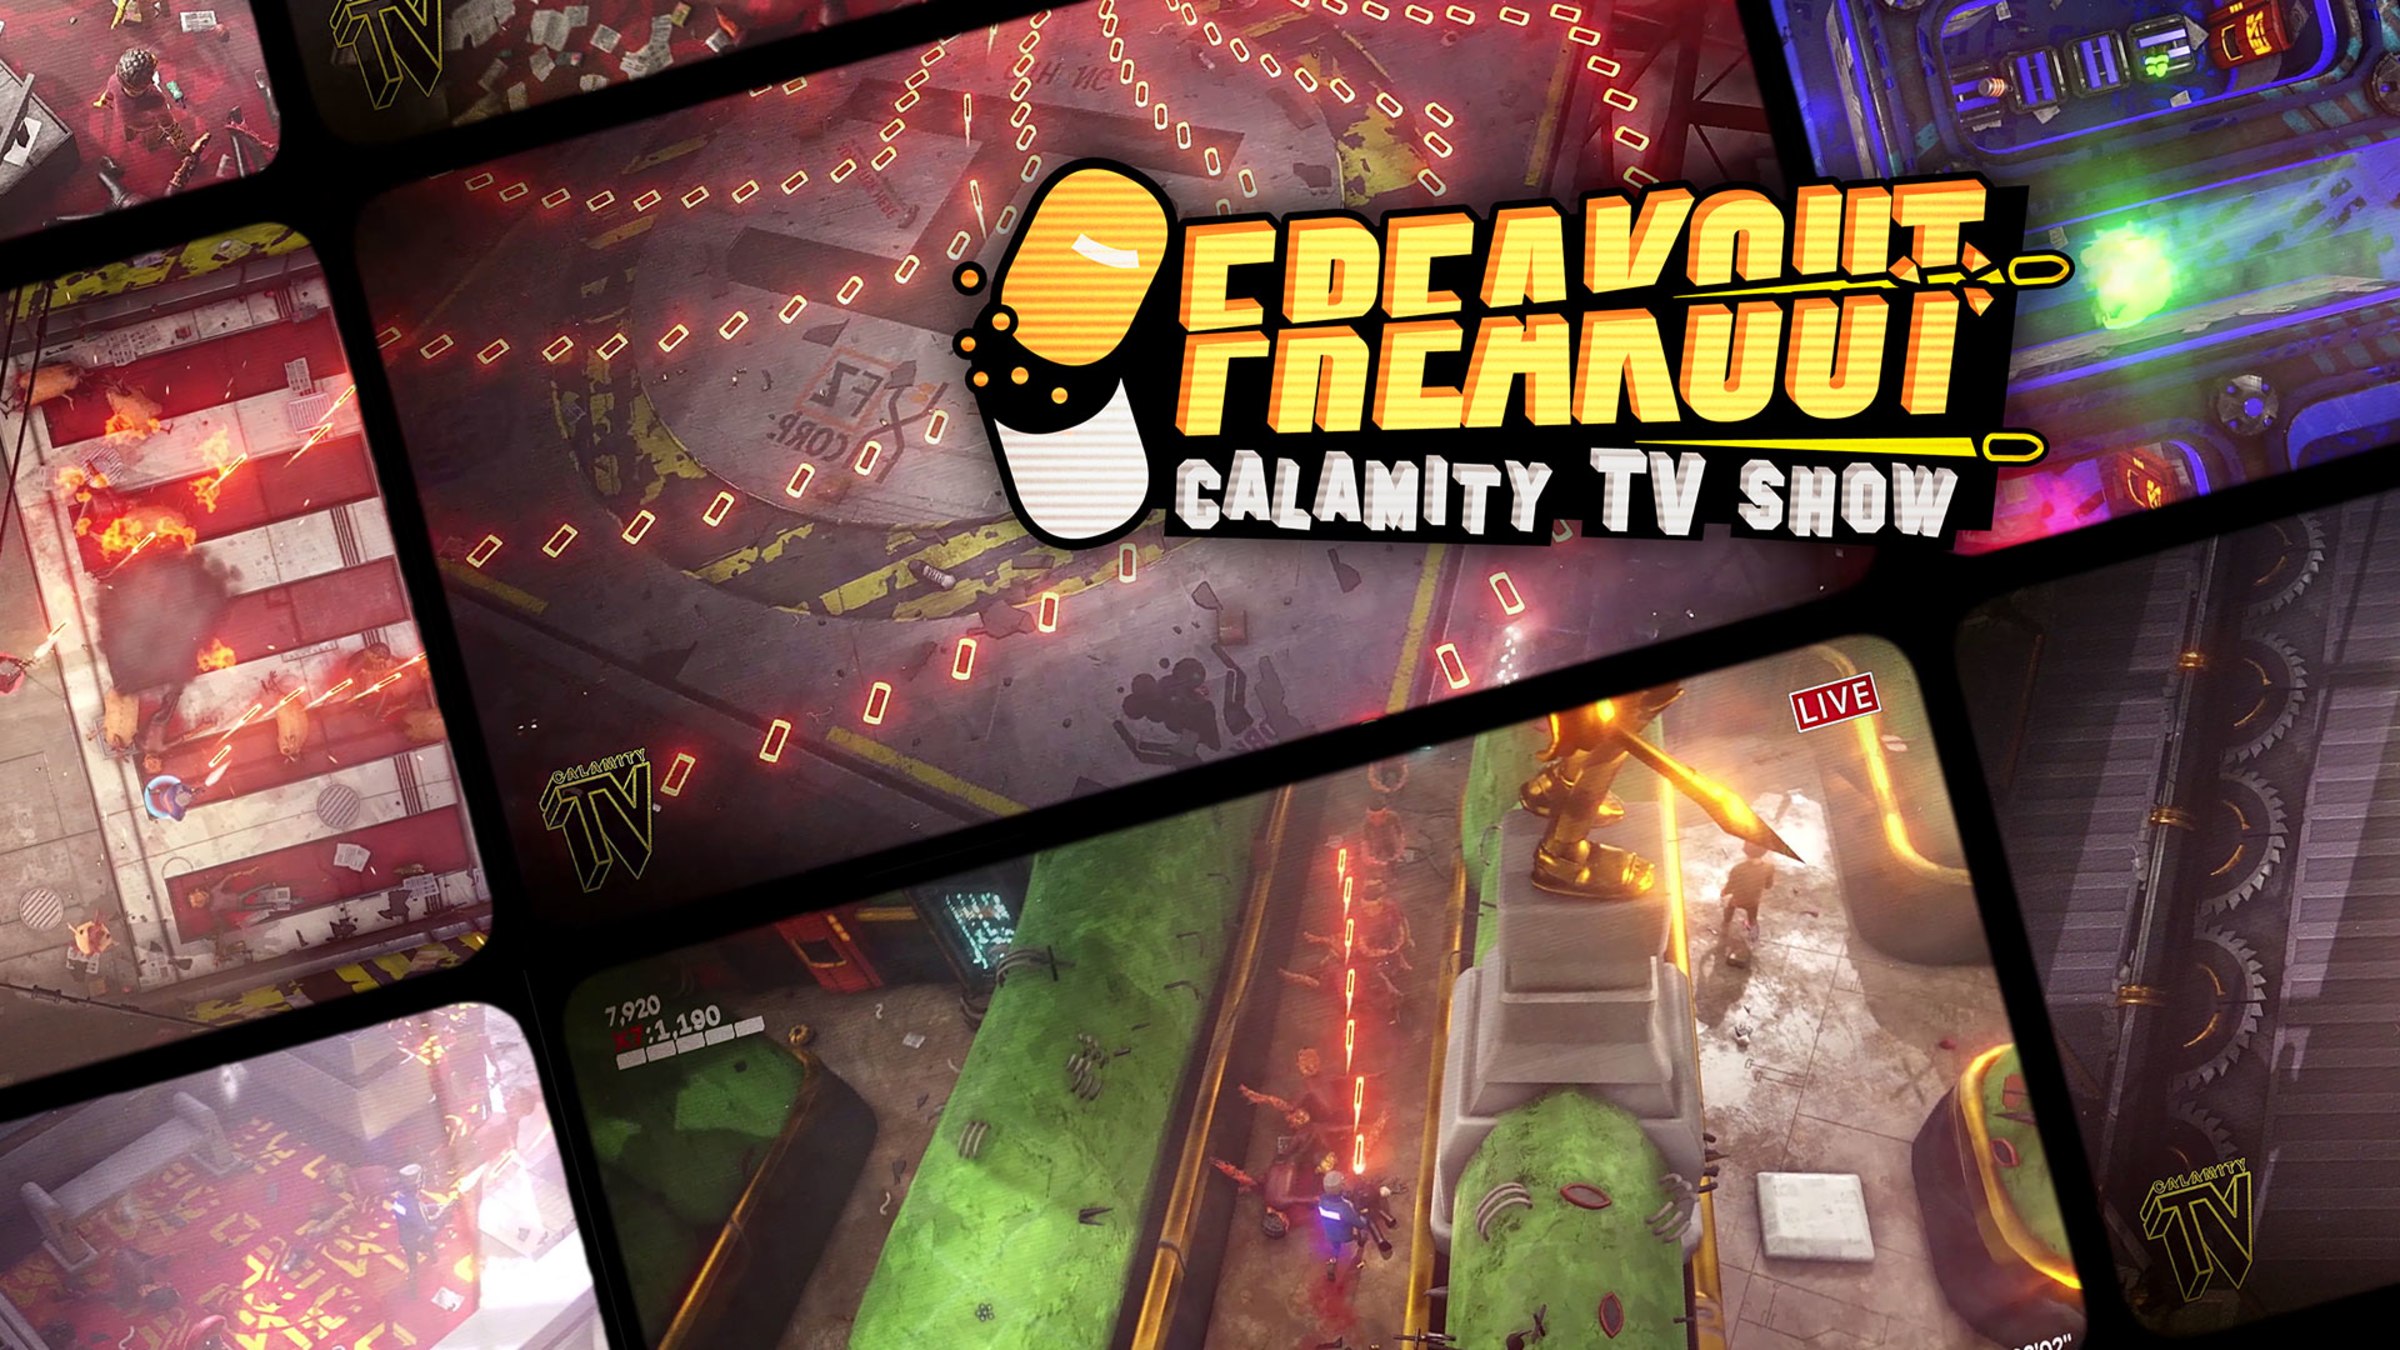 Freakout: Calamity TV Show for Nintendo Switch - Nintendo Official Site